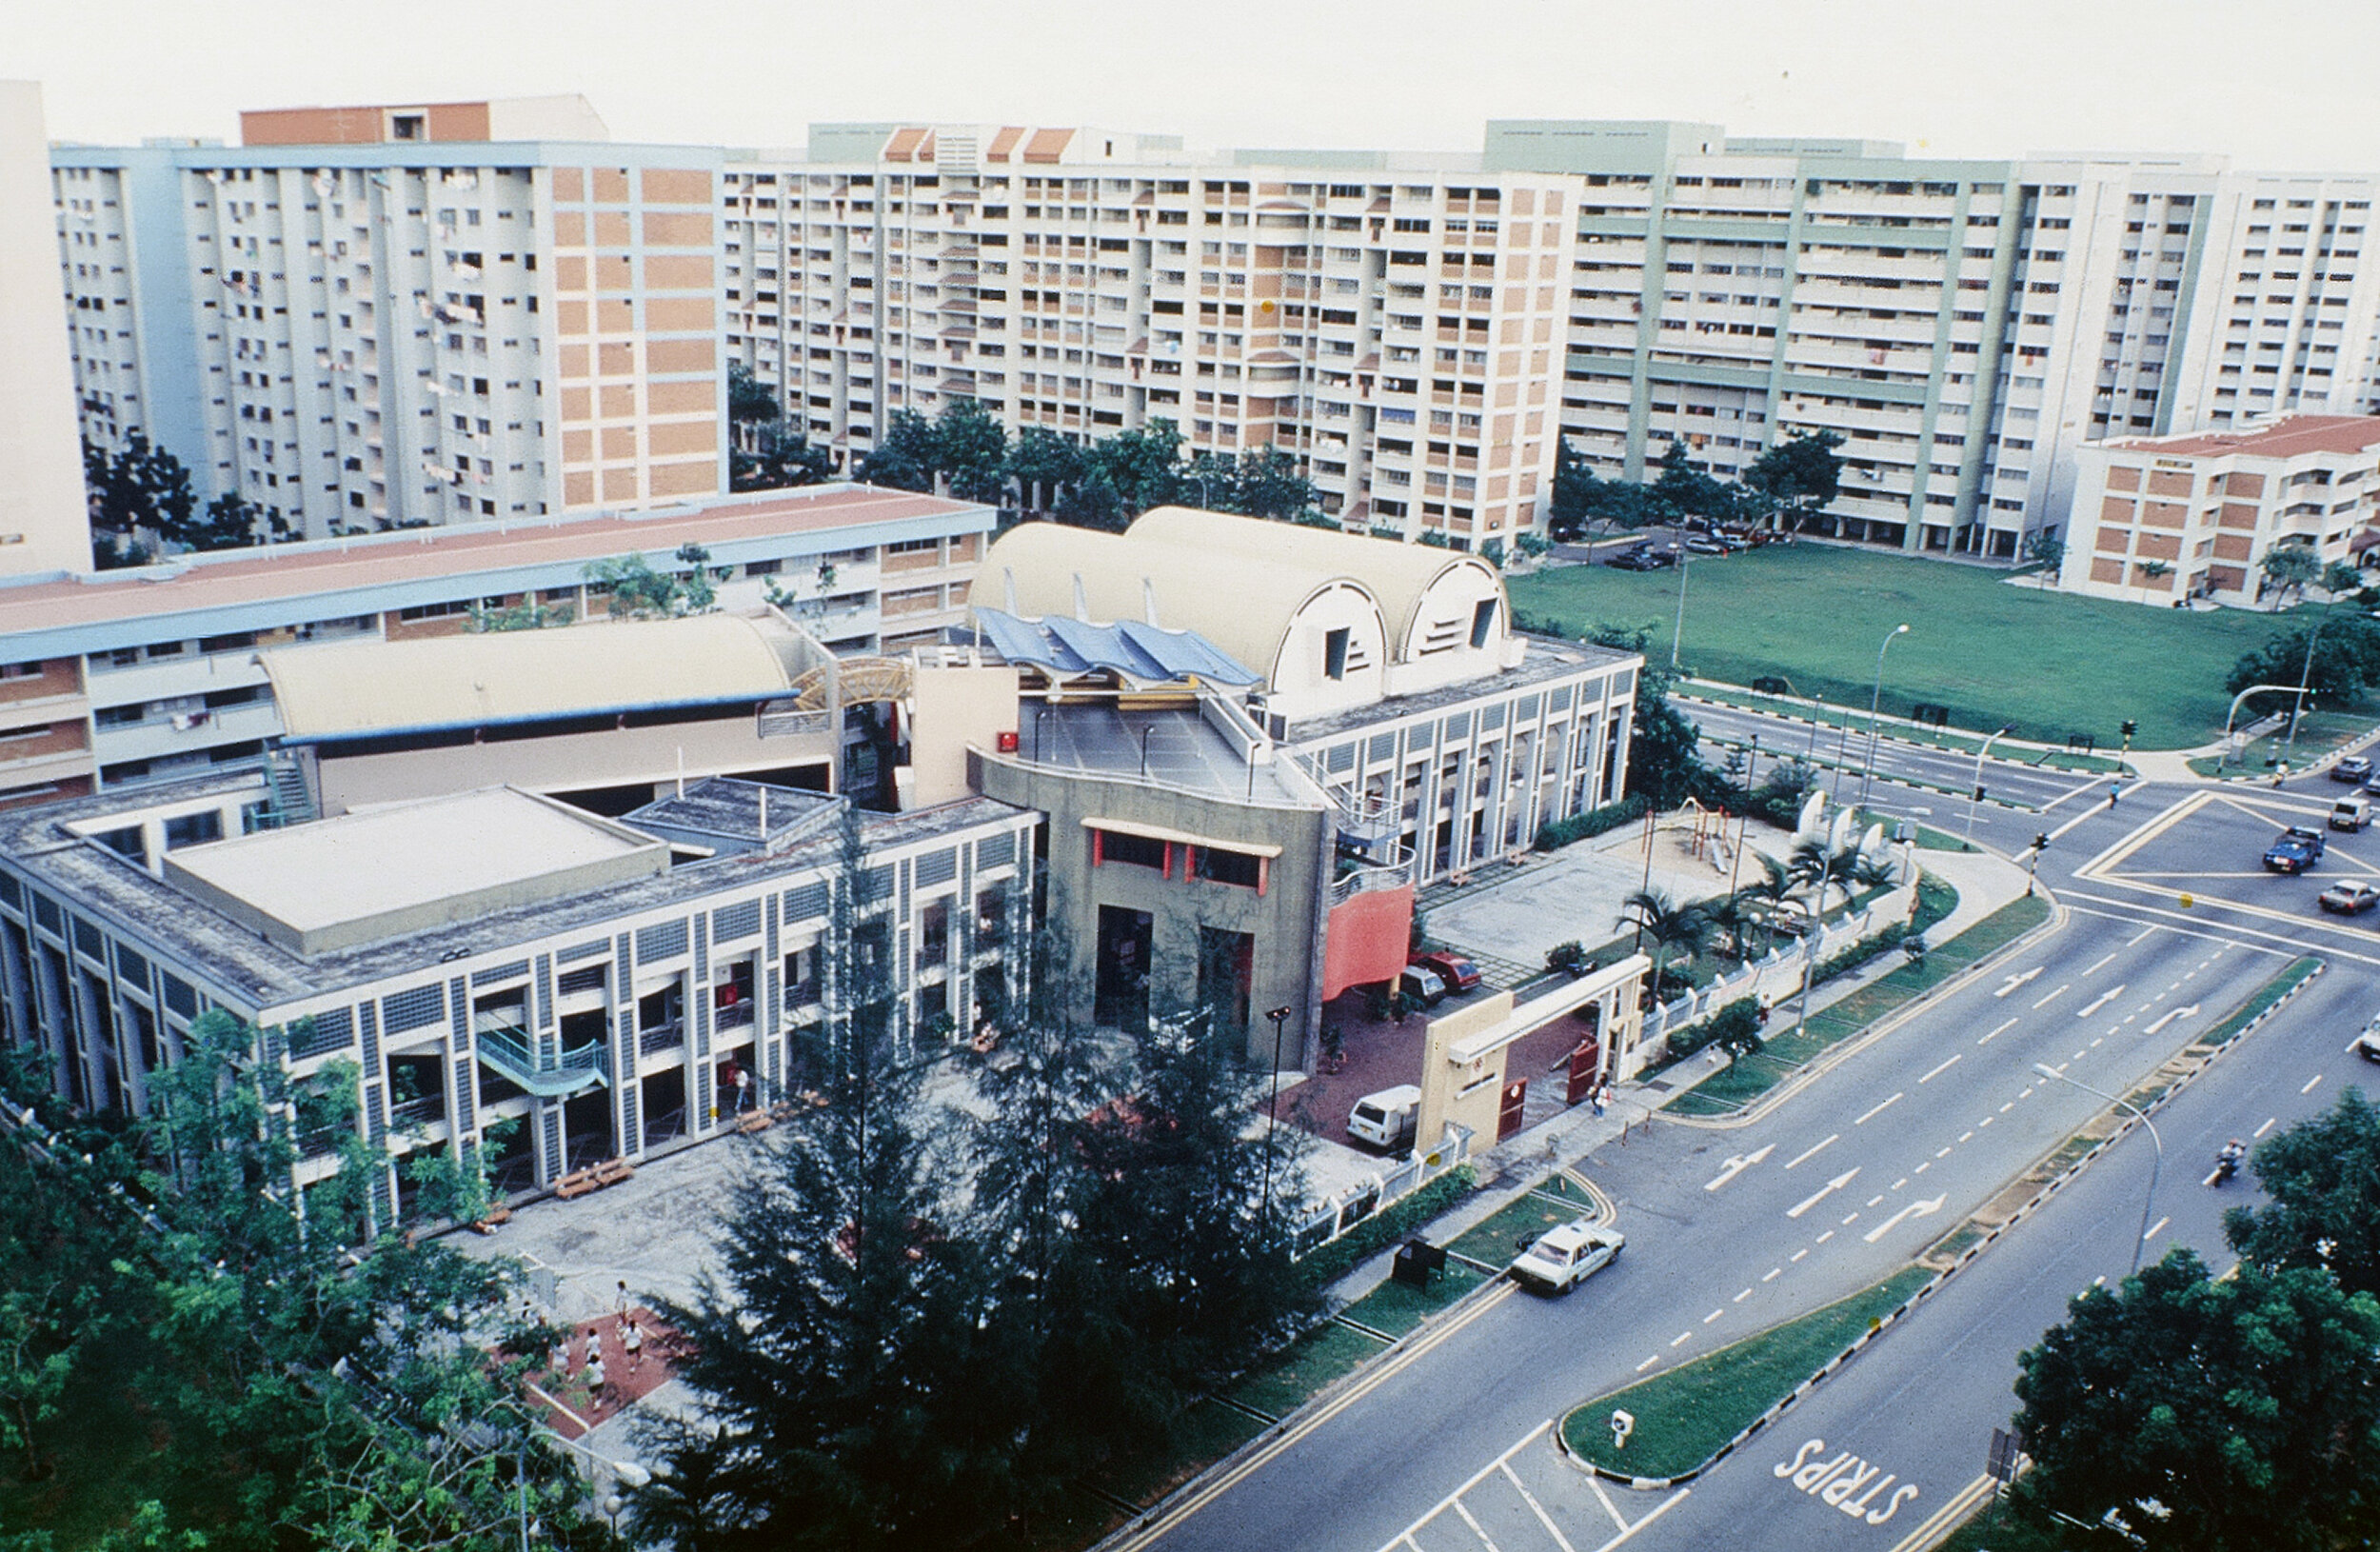  Aerial view of Tampines North Community Centre, after an extension (1992), photograph by Albert Lim, reproduced with the permission of Mok Wei Wei/W Architects. 